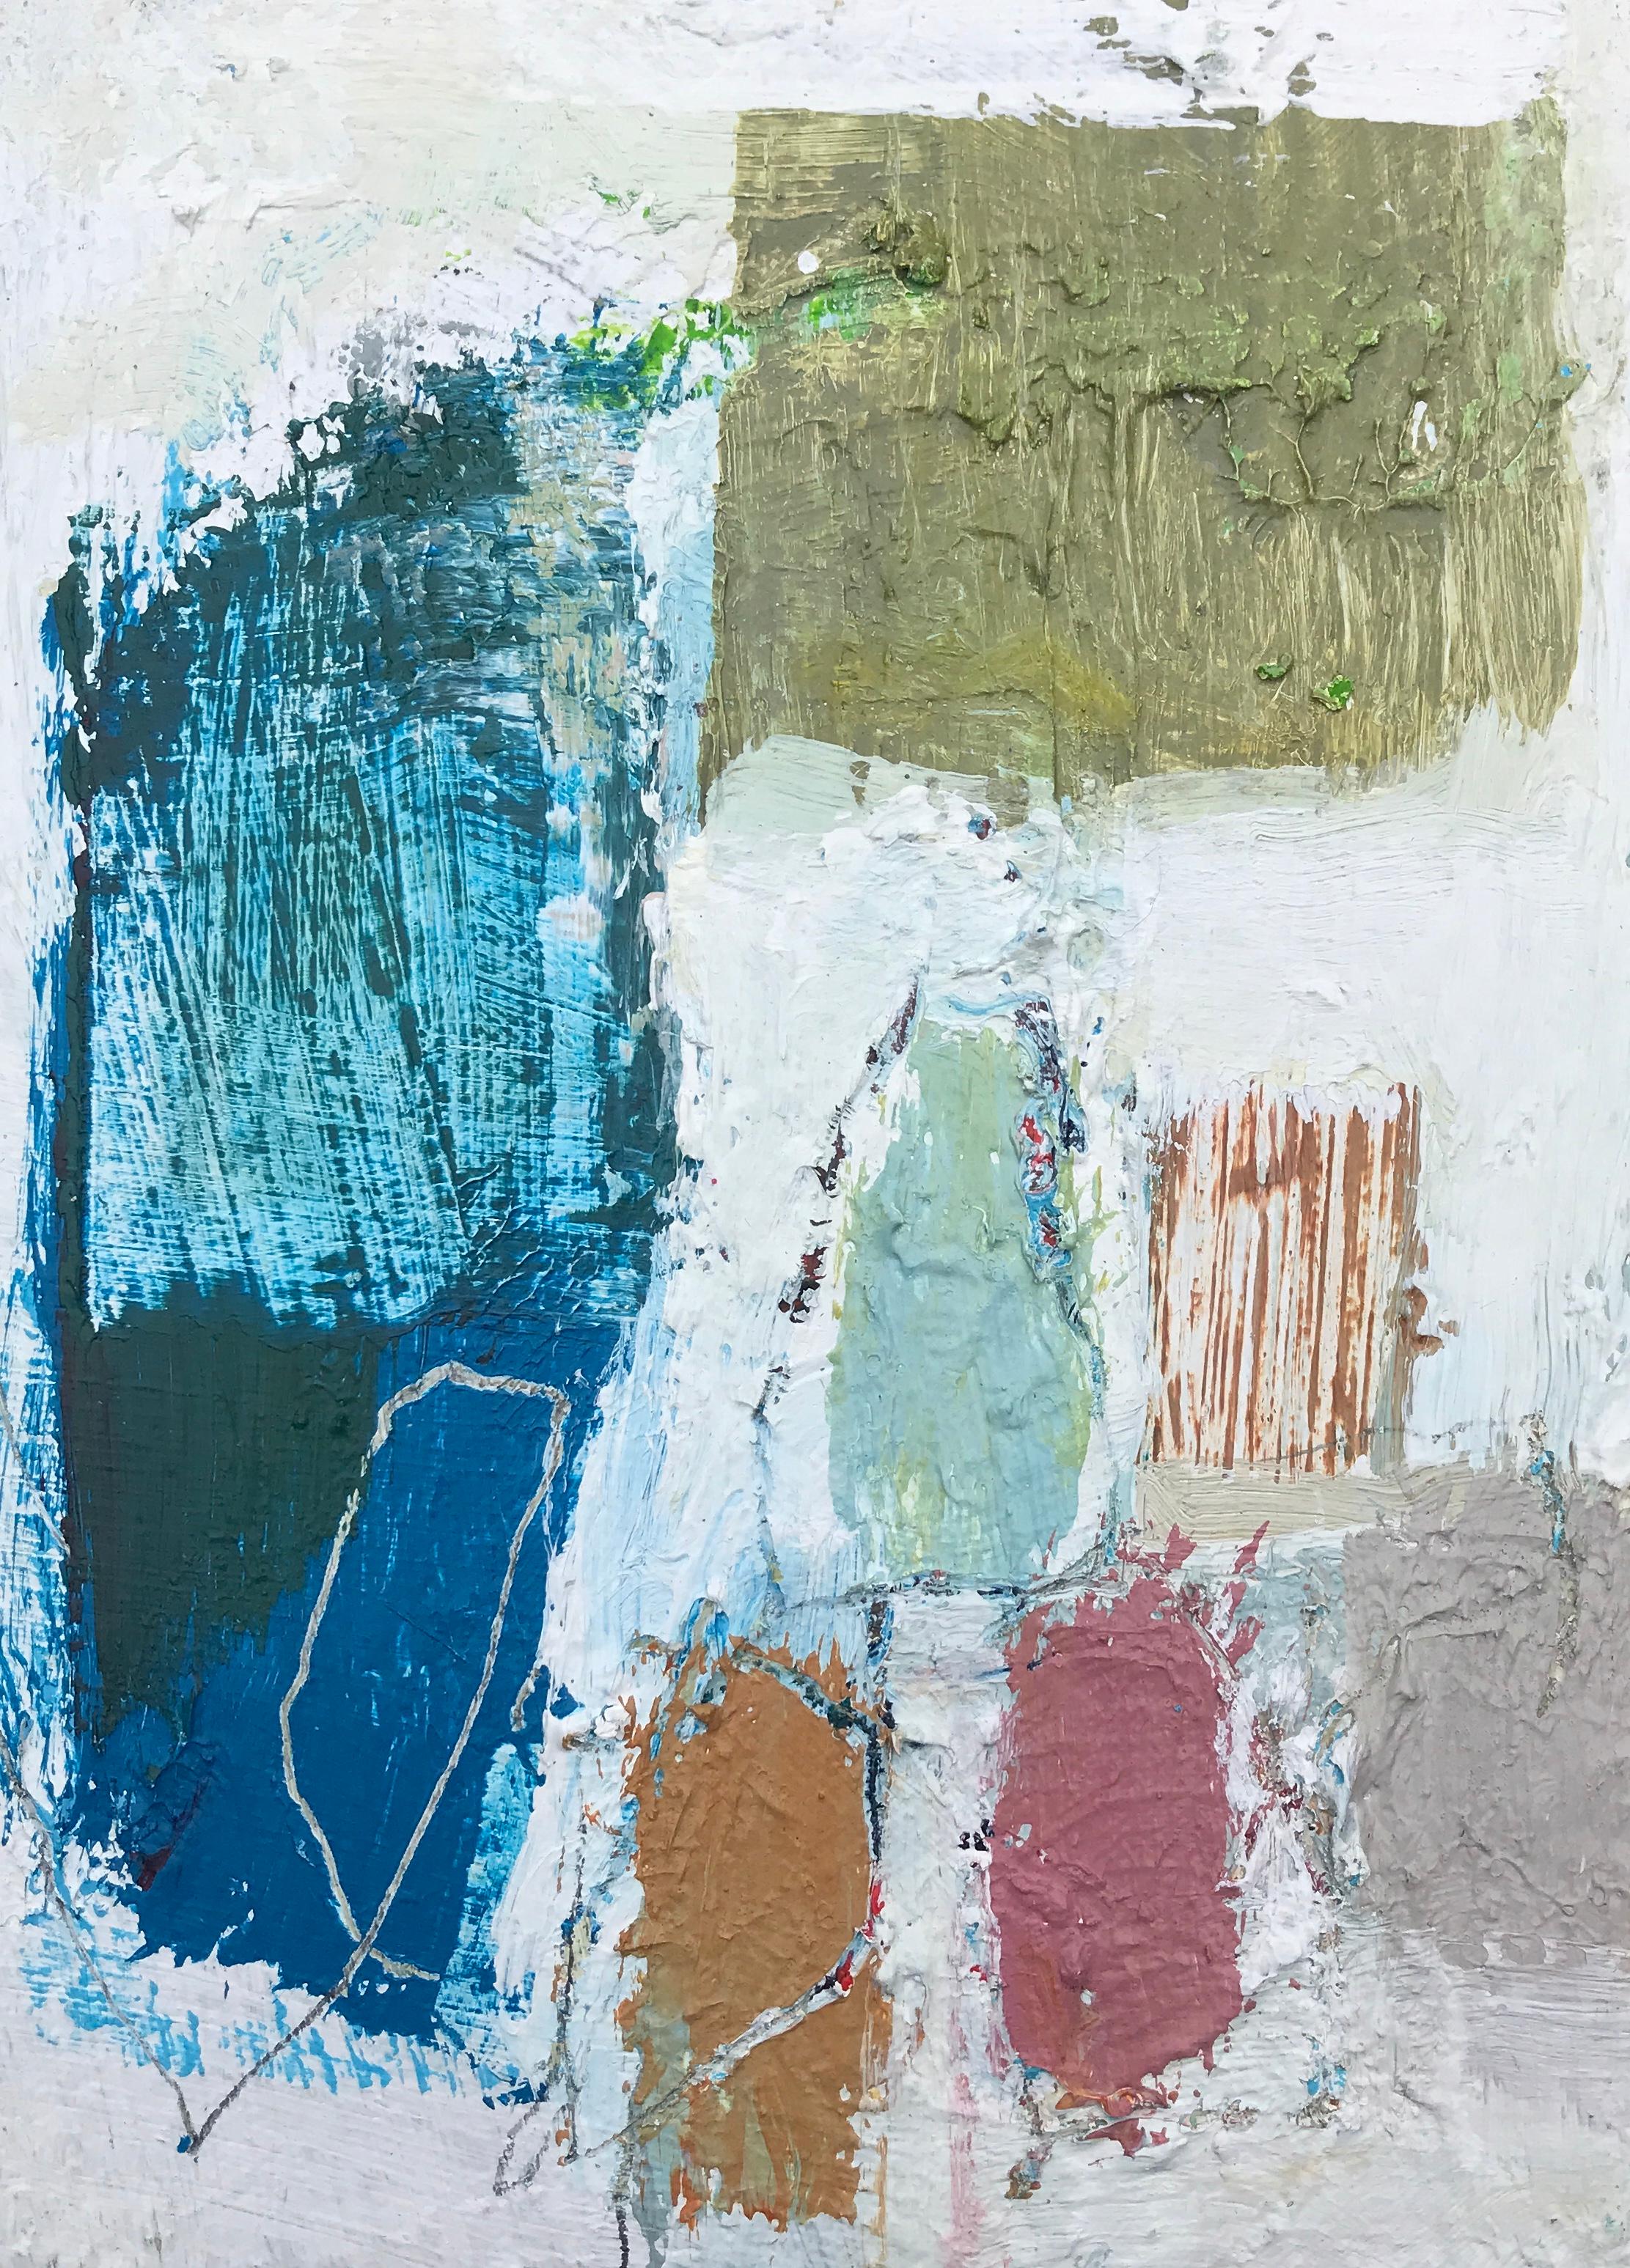 This little abstract painting is part of a 5 piece series, all of which are picture in an included image.  The artist has signed on the back.

Ellen earned her degree in Art Education with a minor in Painting at the Massachusetts College of Art in